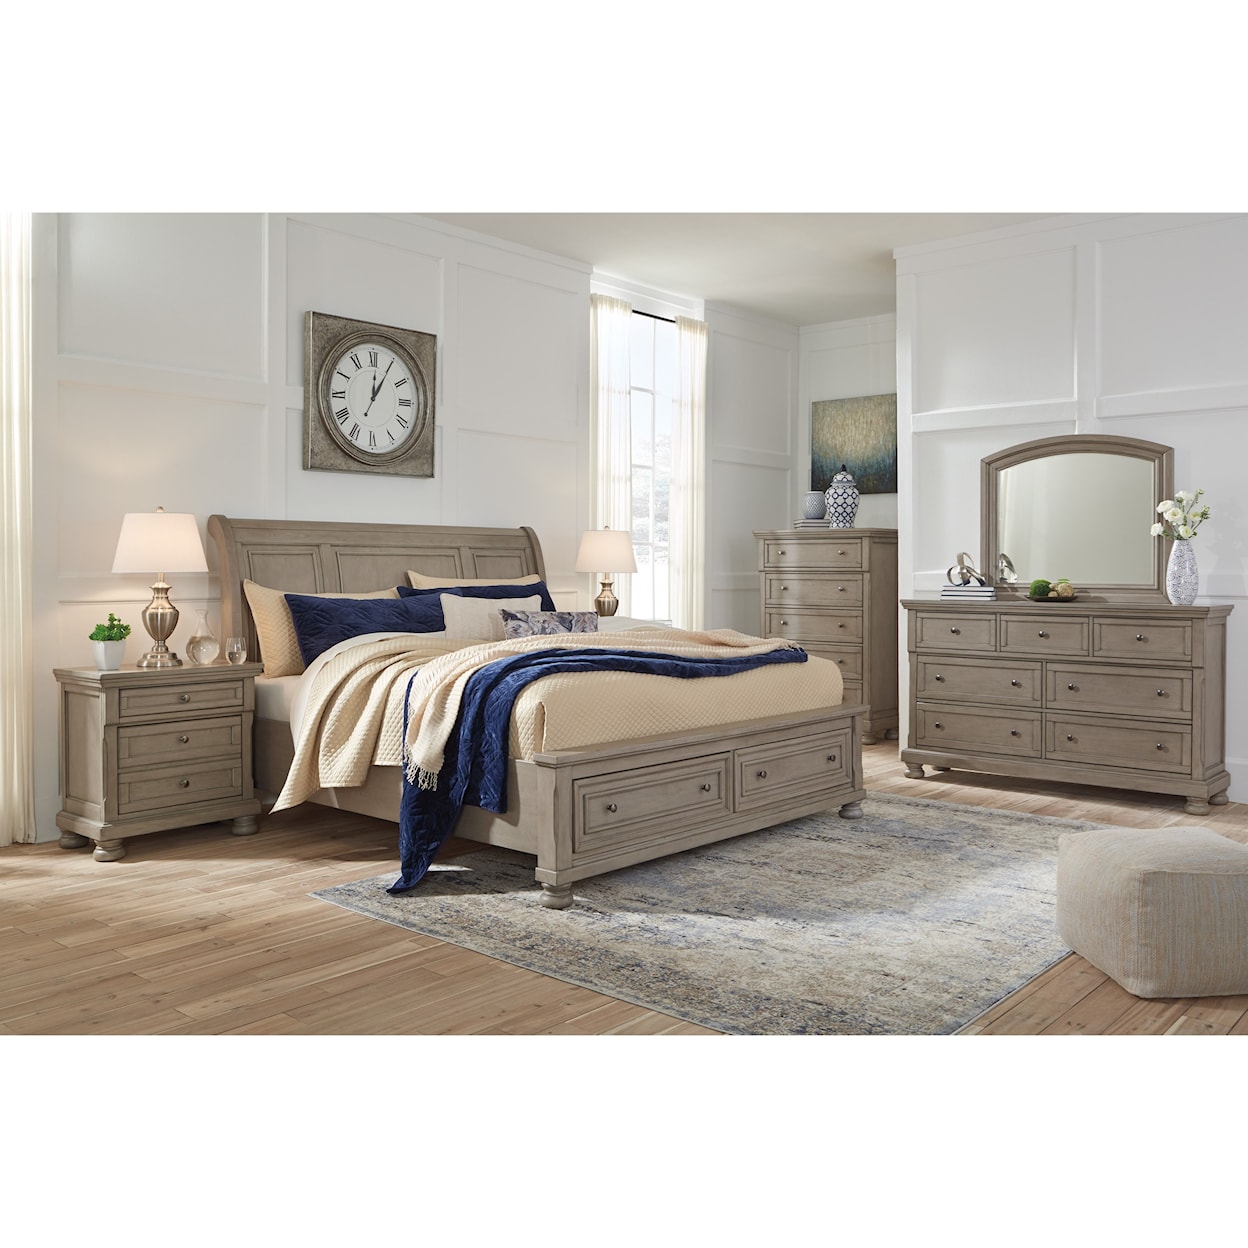 Signature Design by Ashley Lettner 7PC Queen Bedroom Group